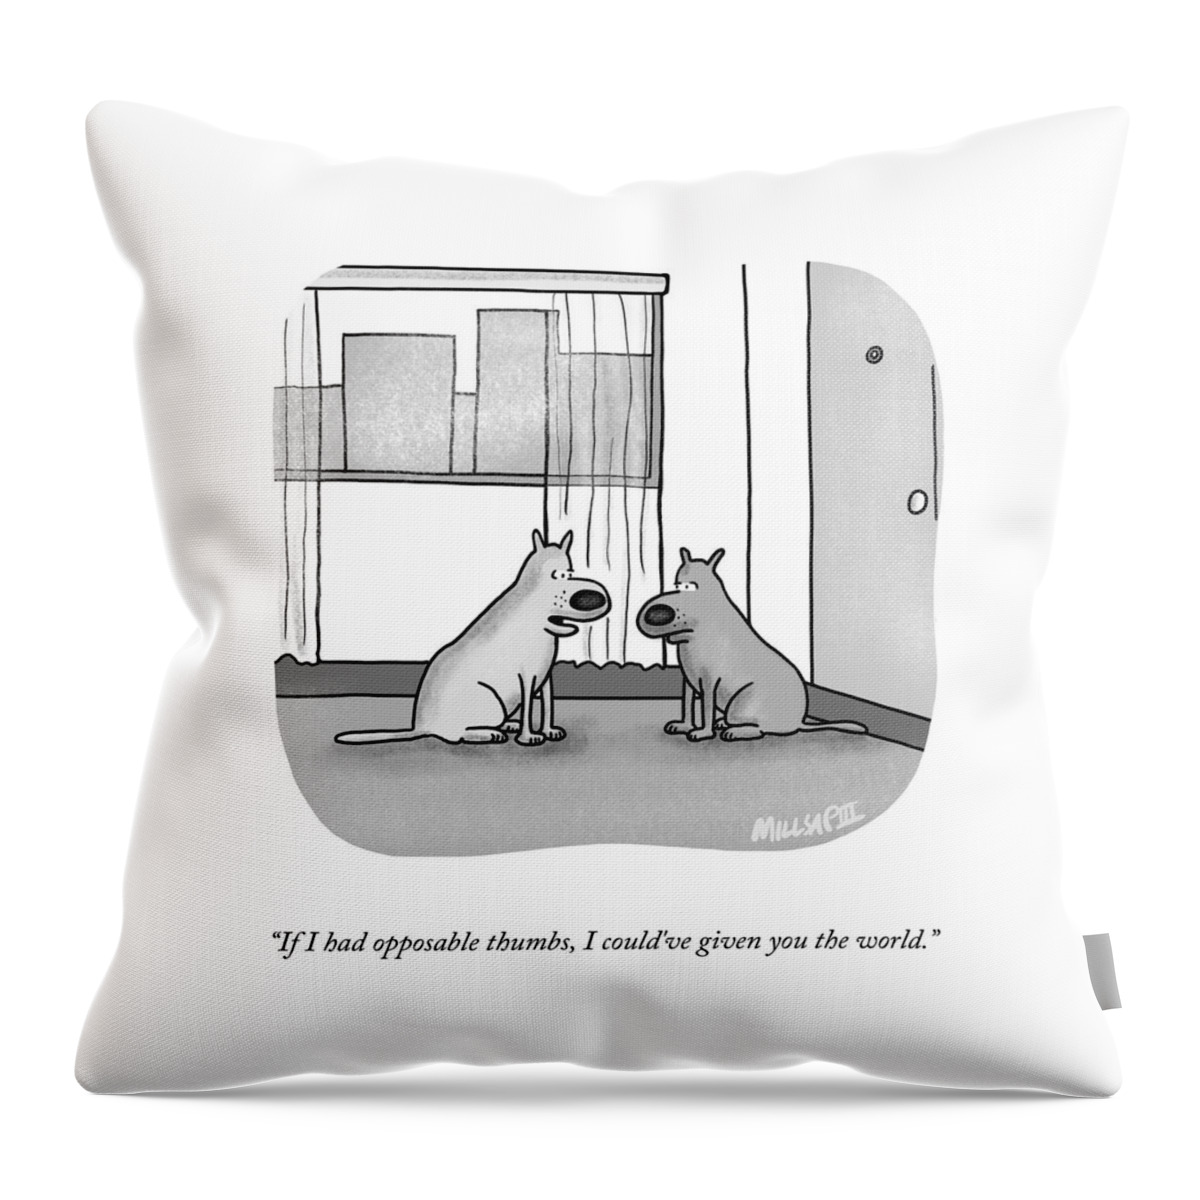 I Could've Giver You The World Throw Pillow